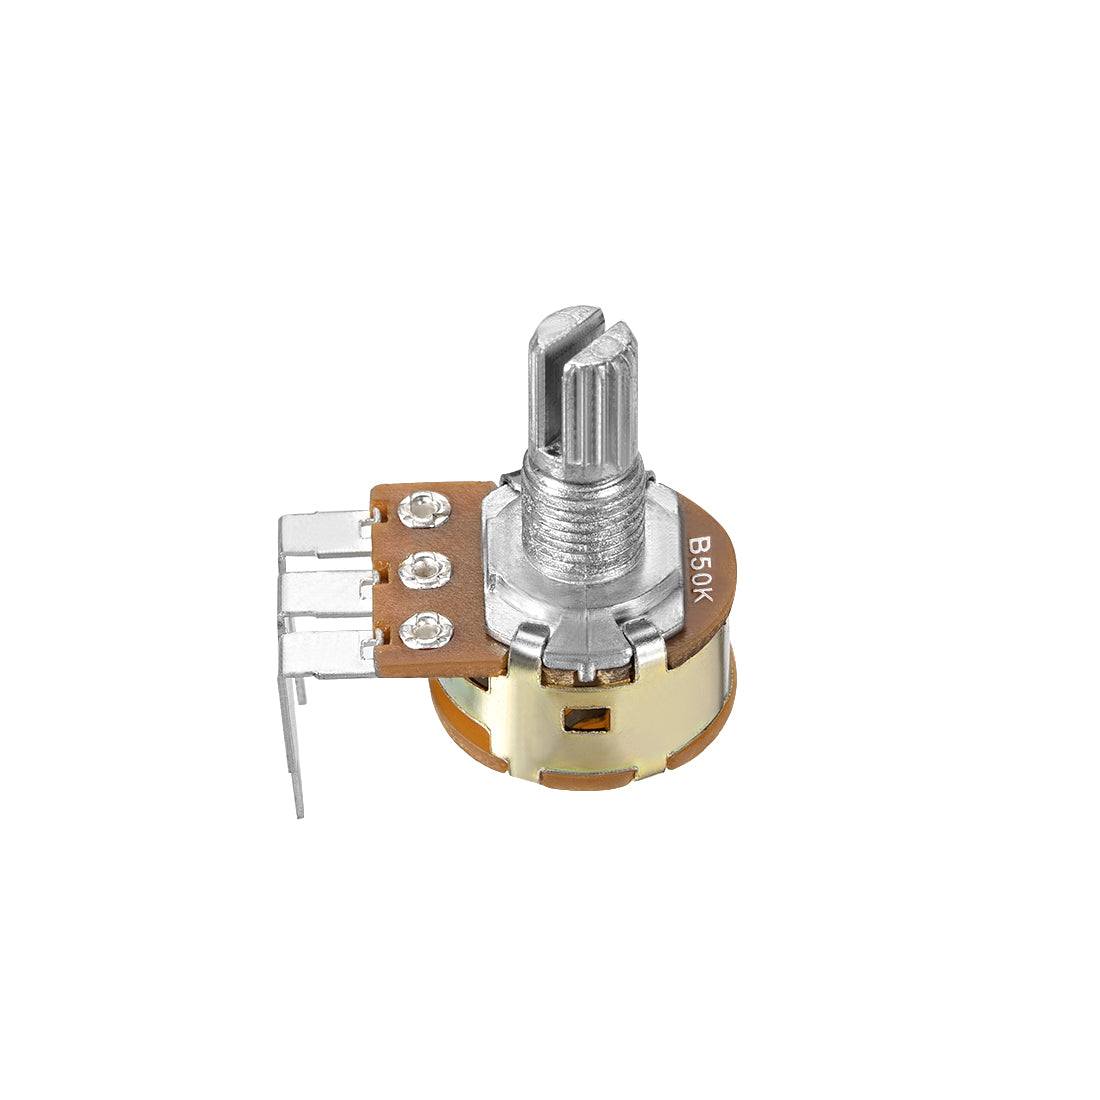 uxcell Uxcell WH148 Potentiometer with Switch 50K Ohm Variable Resistors Single Turn Rotary Carbon Film Taper 10pcs